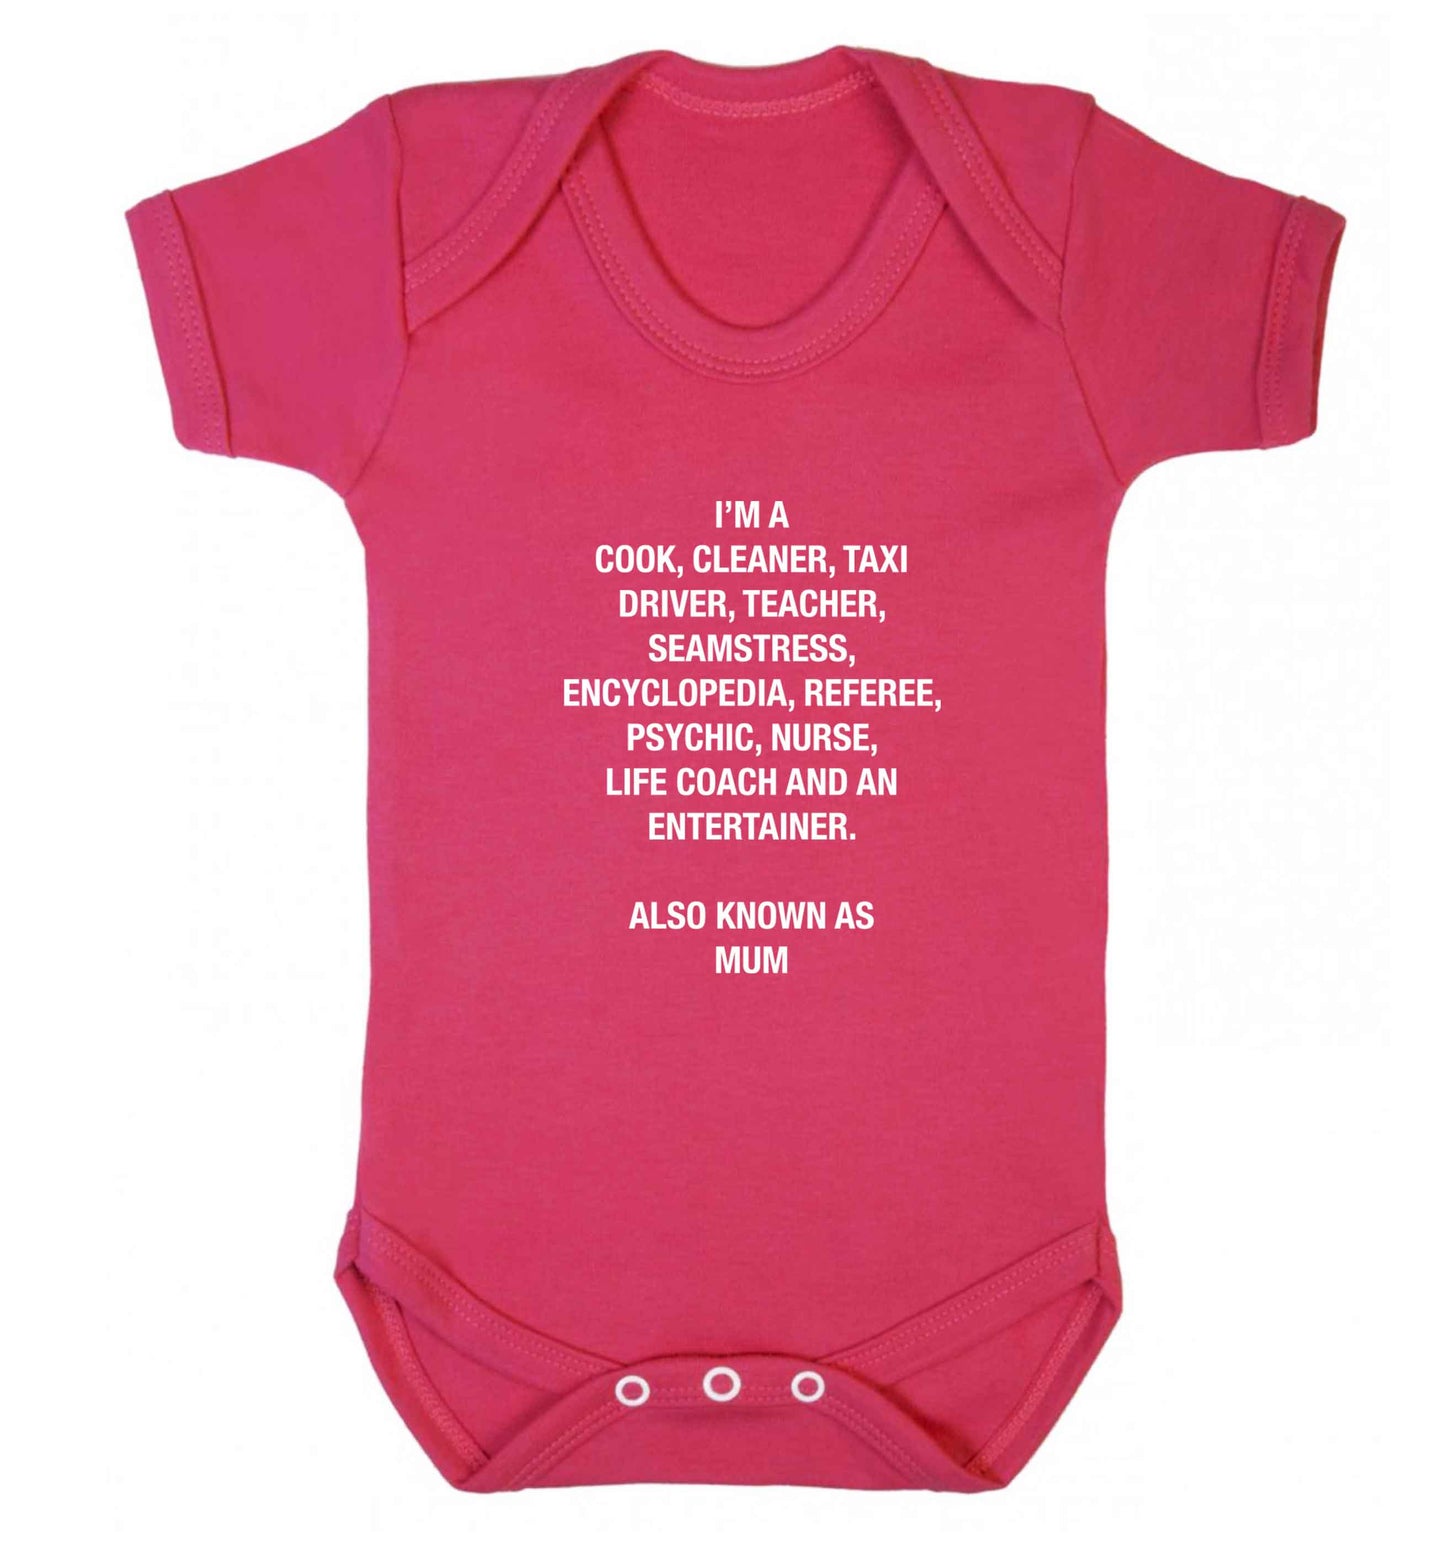 Funny gifts for your mum on mother's dayor her birthday! Mum, cook, cleaner, taxi driver, teacher, seamstress, encyclopedia, referee, psychic, nurse, life coach and entertainer baby vest dark pink 18-24 months